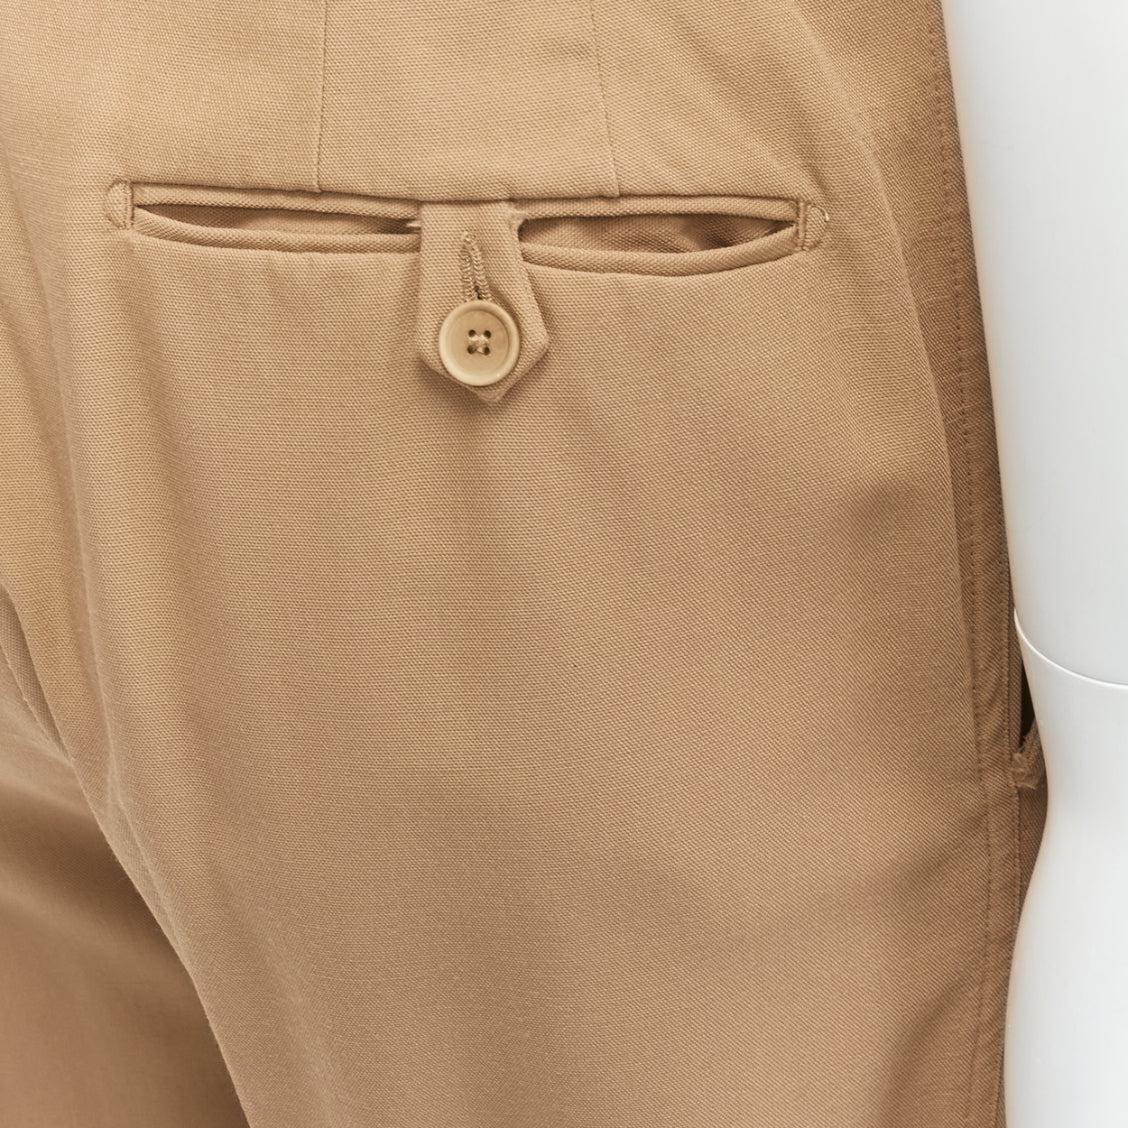 BOTTEGA VENETA 100% wool tan brown cotton lined pleated front pants IT48 M
Reference: CNLE/A00282
Brand: Bottega Veneta
Designer: Tomas Maier
Material: Wool
Color: Brown
Pattern: Solid
Closure: Button Fly
Extra Details: 1 pocket at right back.